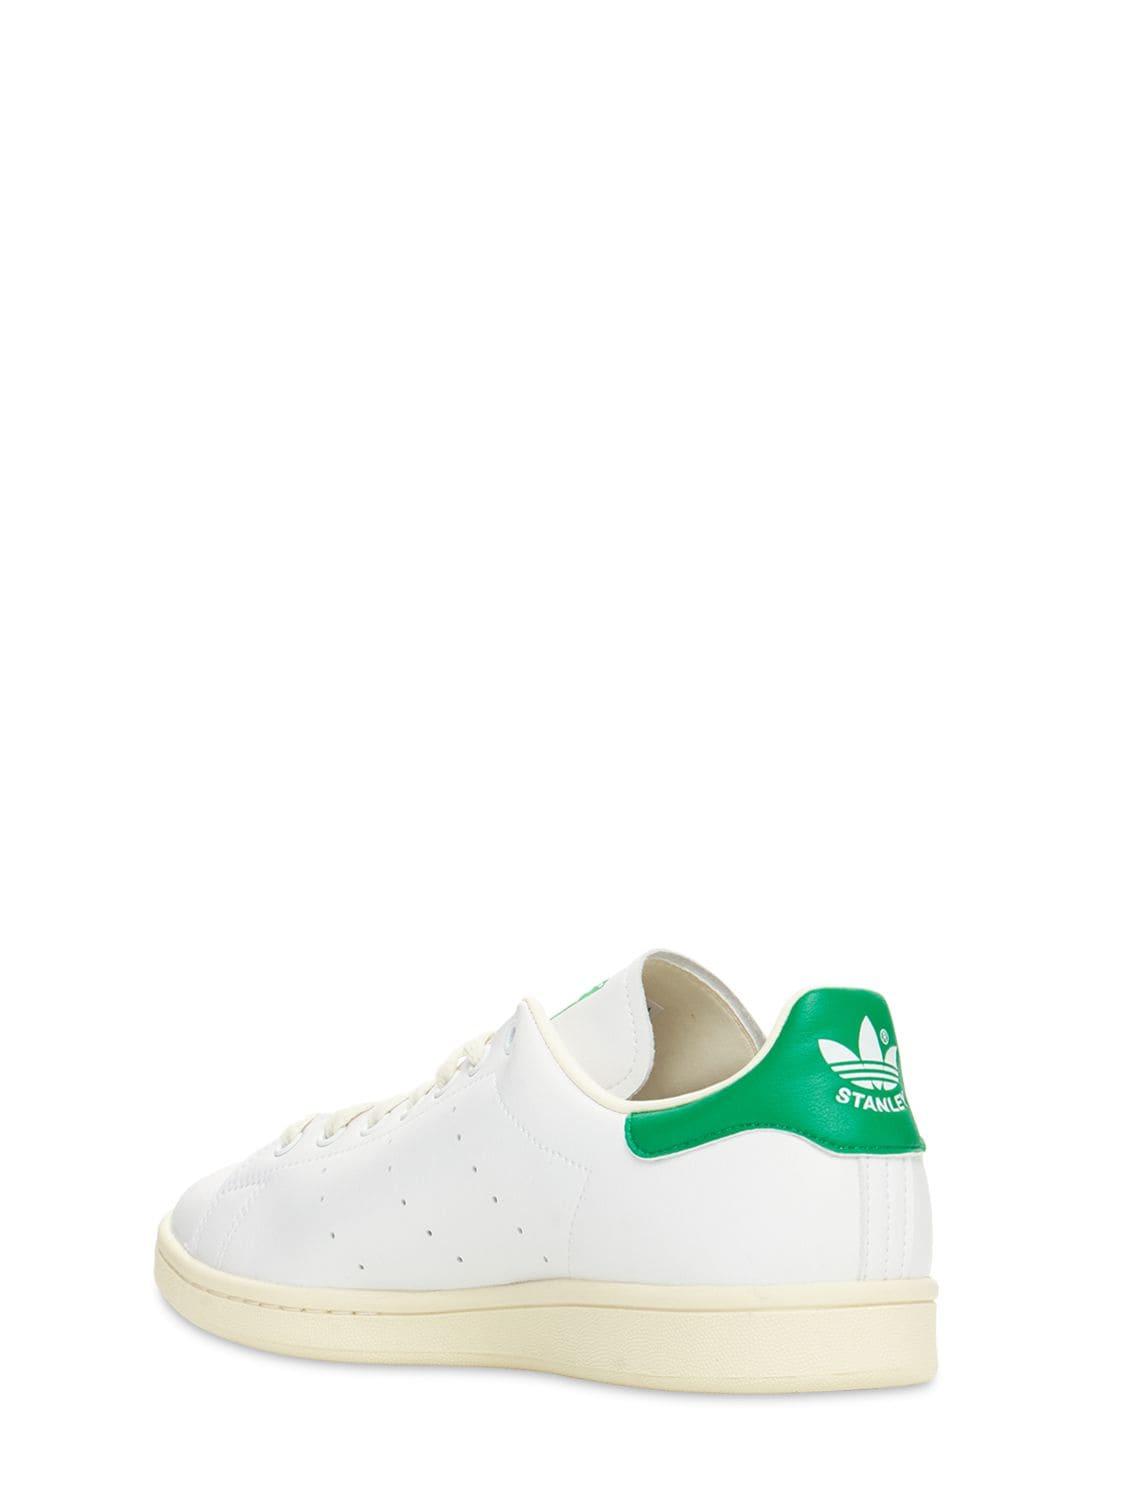 adidas Originals Stan Smith Mismatched Sneakers in White for Men | Lyst